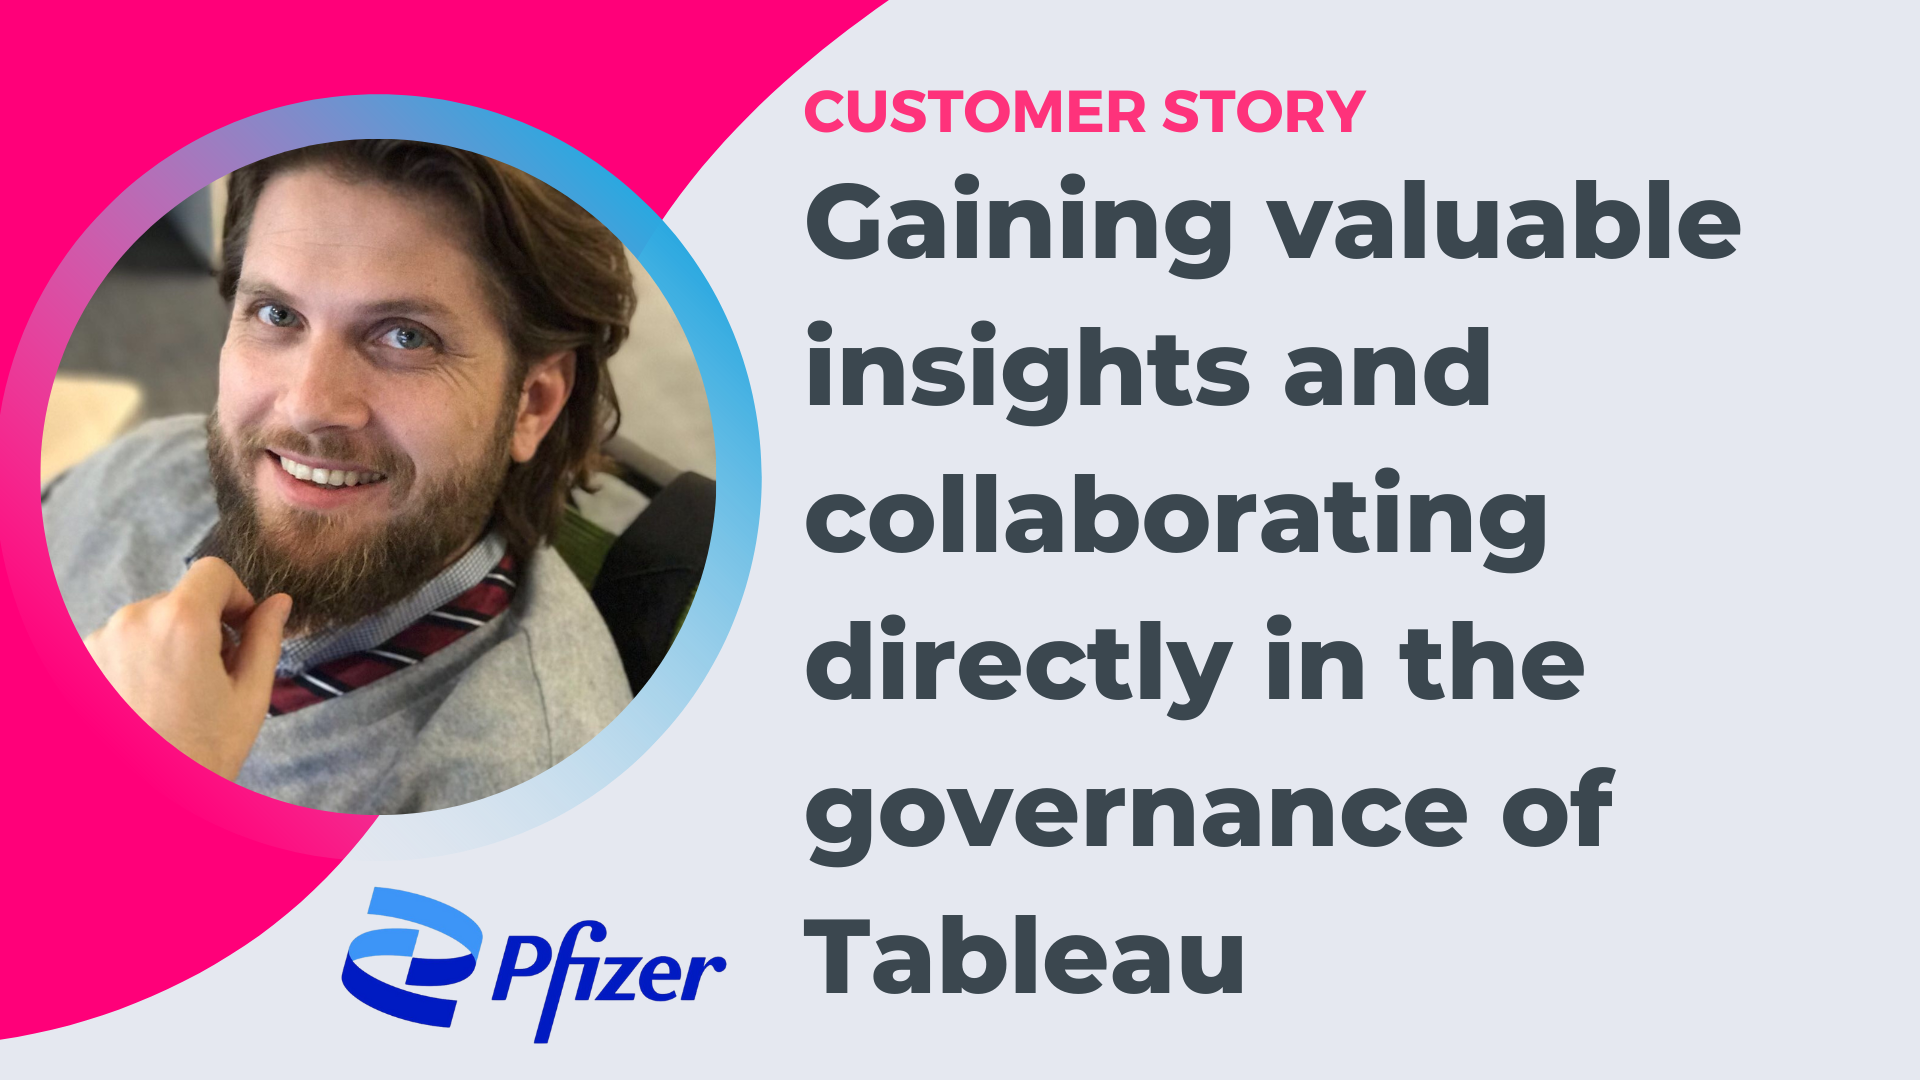 Customer story Pfizer - gaining valuable insights and collaborating directly in the governance of Tableau